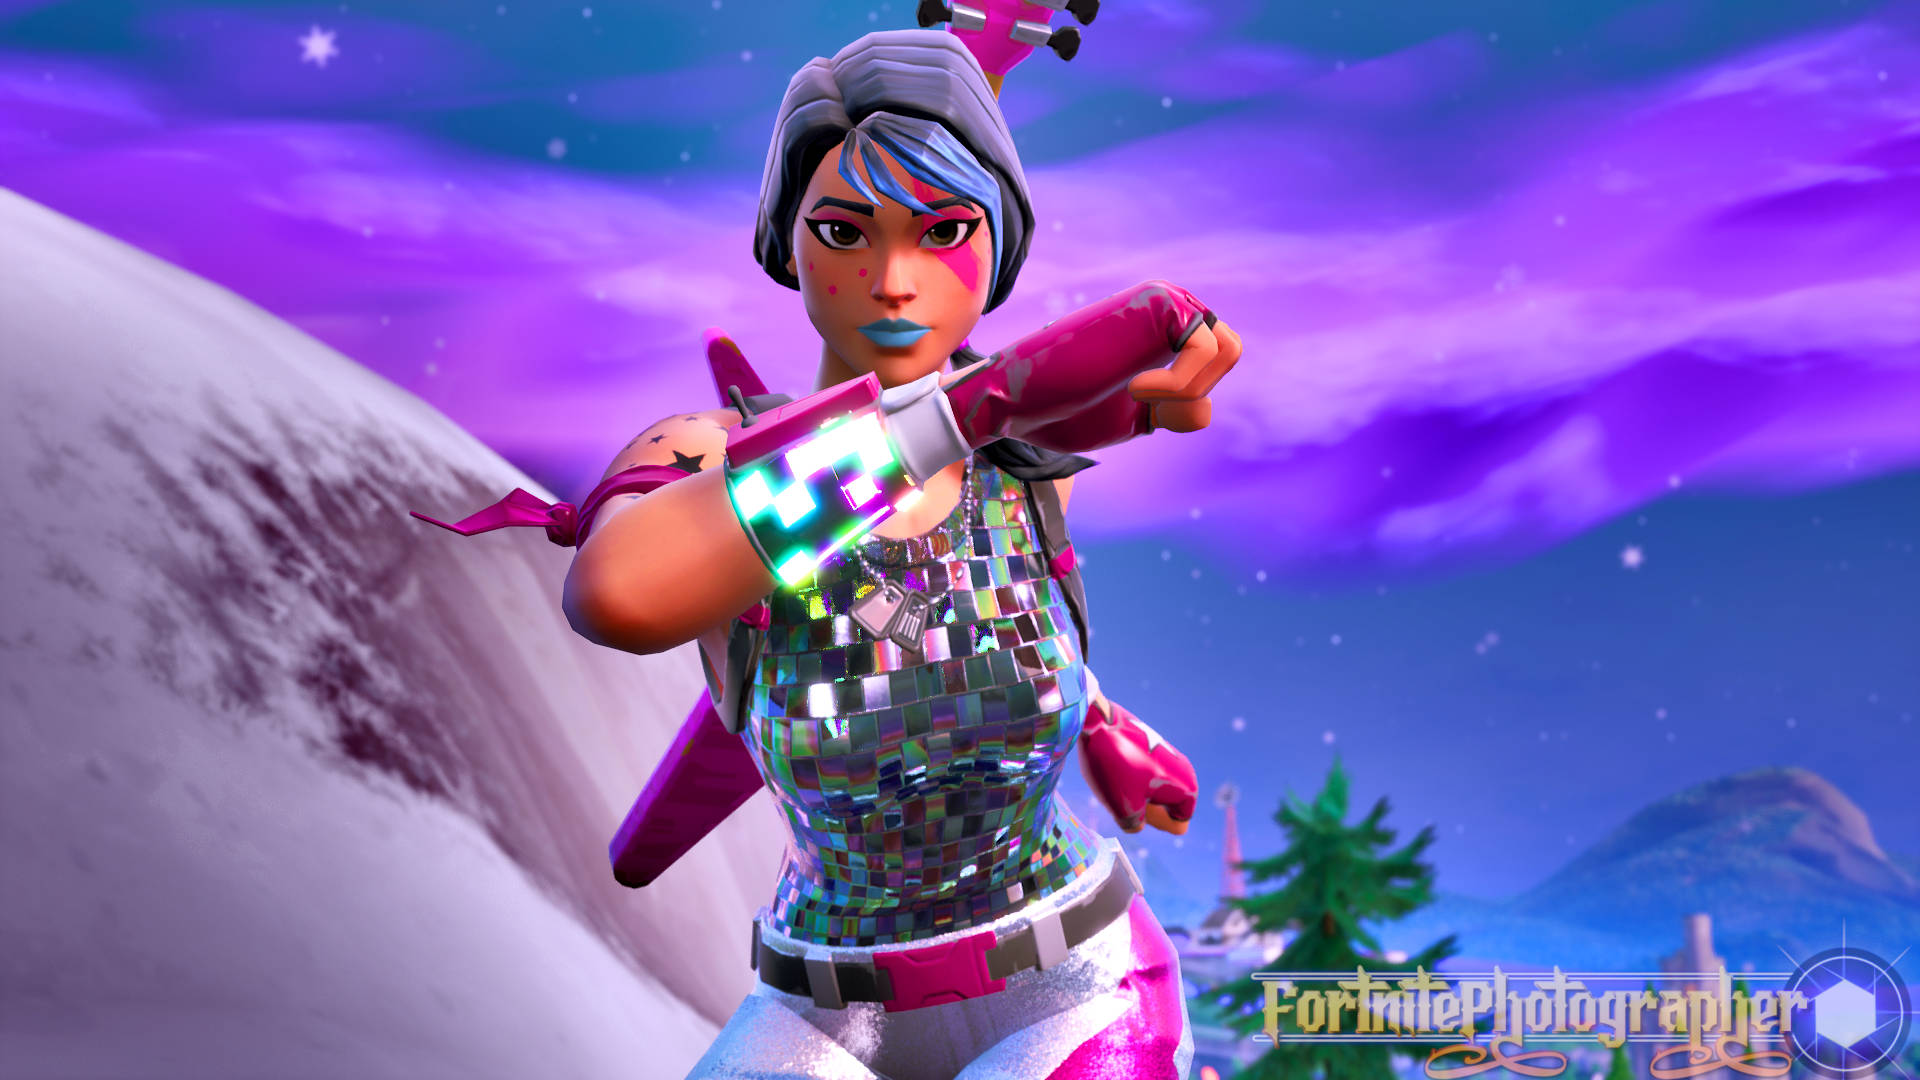 Fortnite - A Girl In A Pink Outfit Wallpaper